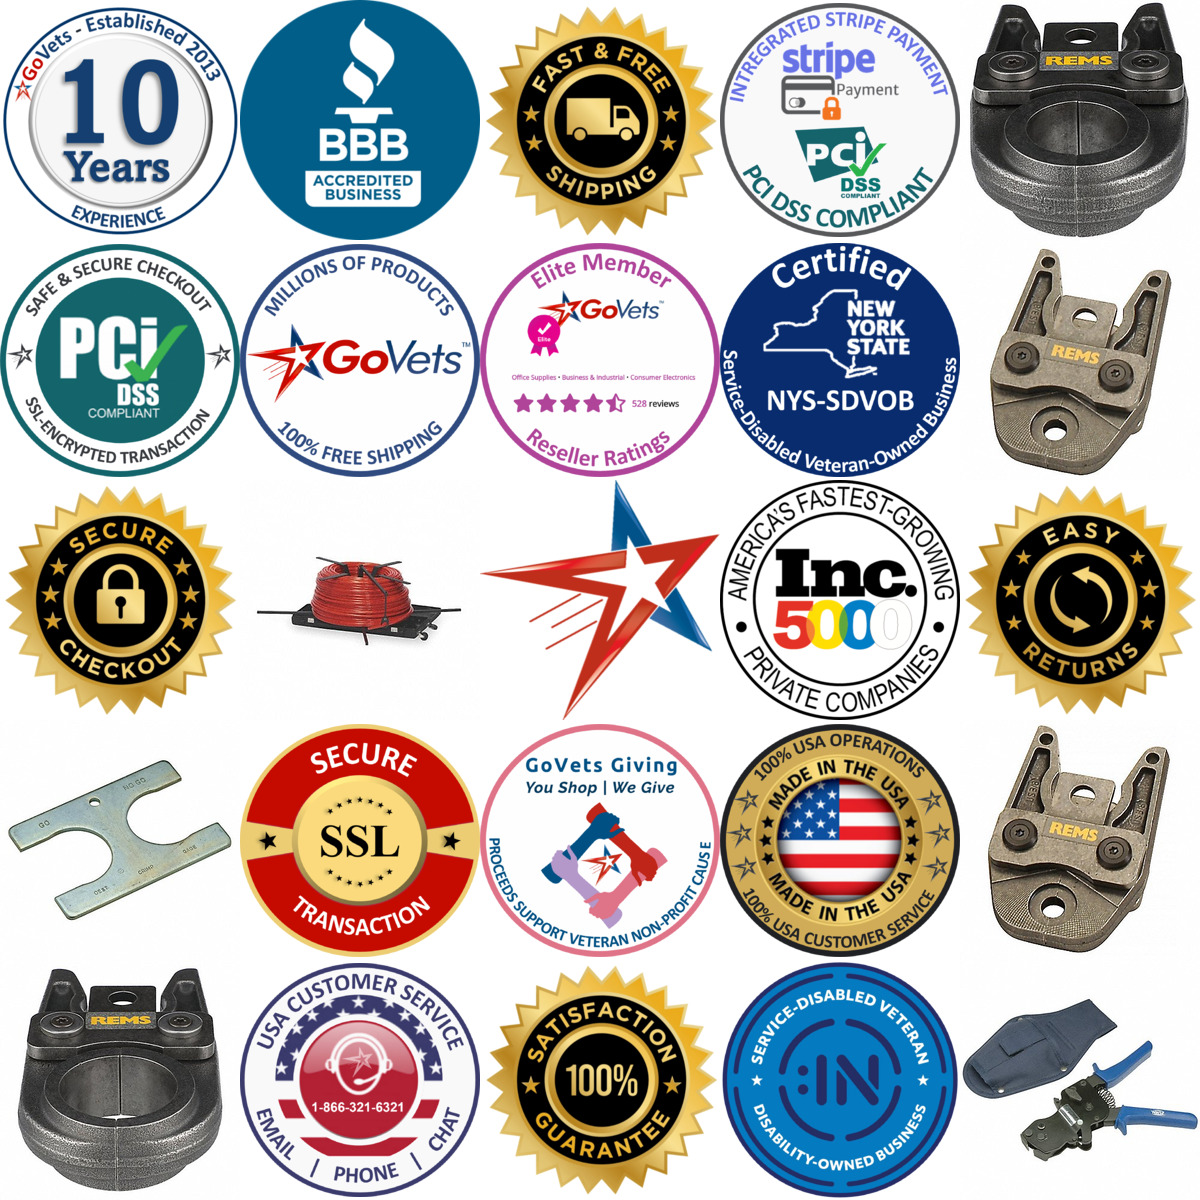 A selection of Pex Tools products on GoVets